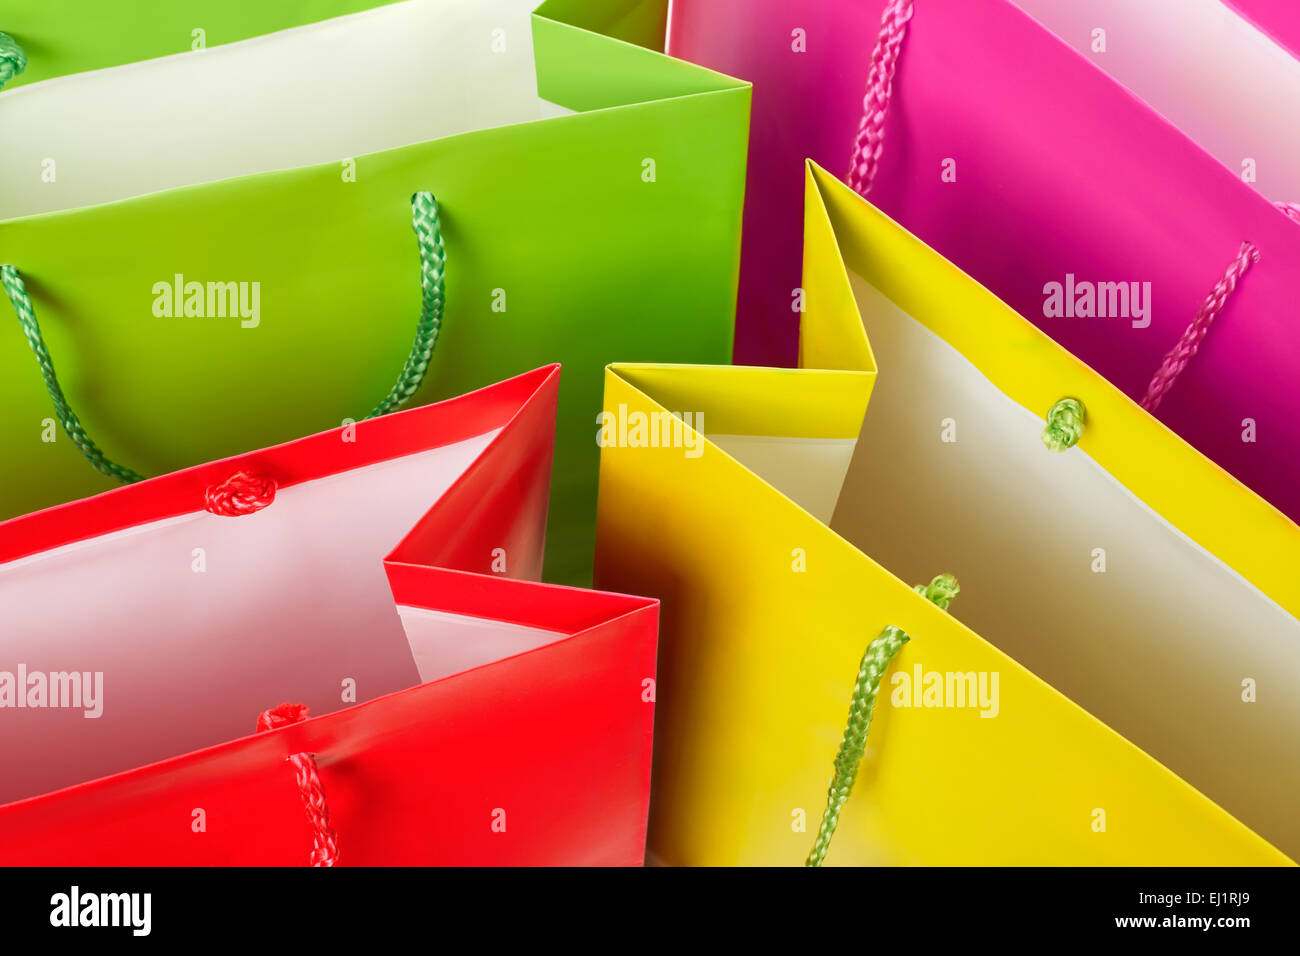 Colorful paper shopping bags background Stock Photo